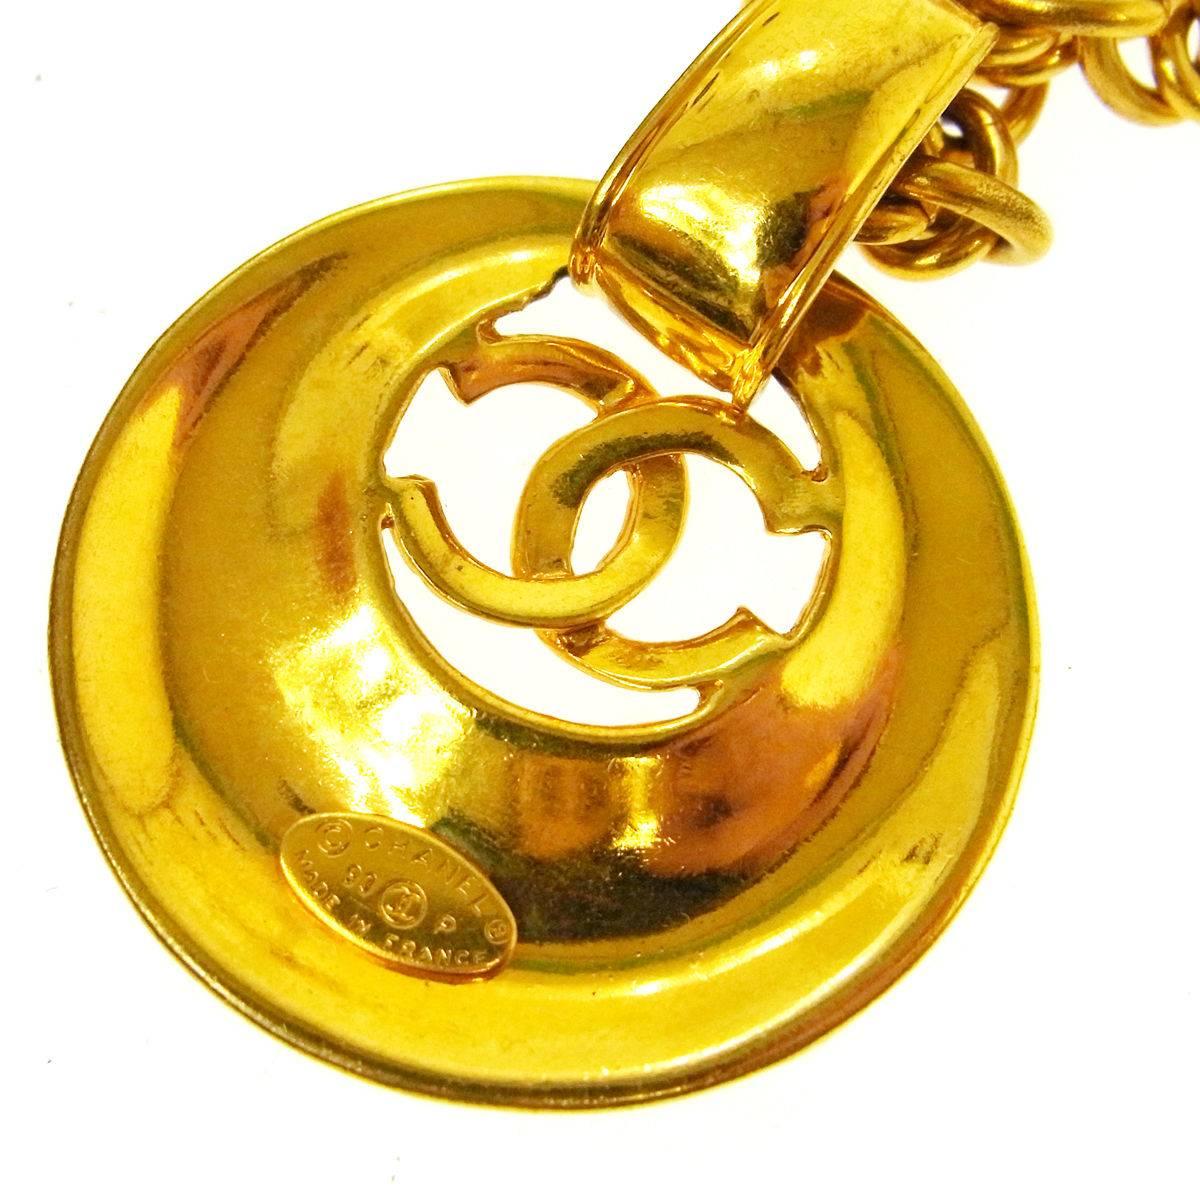 Chanel Vintage Gold Long Link Oval Medallion Coin Charm Necklace 

Metal
Gold tone
Lobster claw closure
Made in France
Charm measures 2"
Chain length 31"